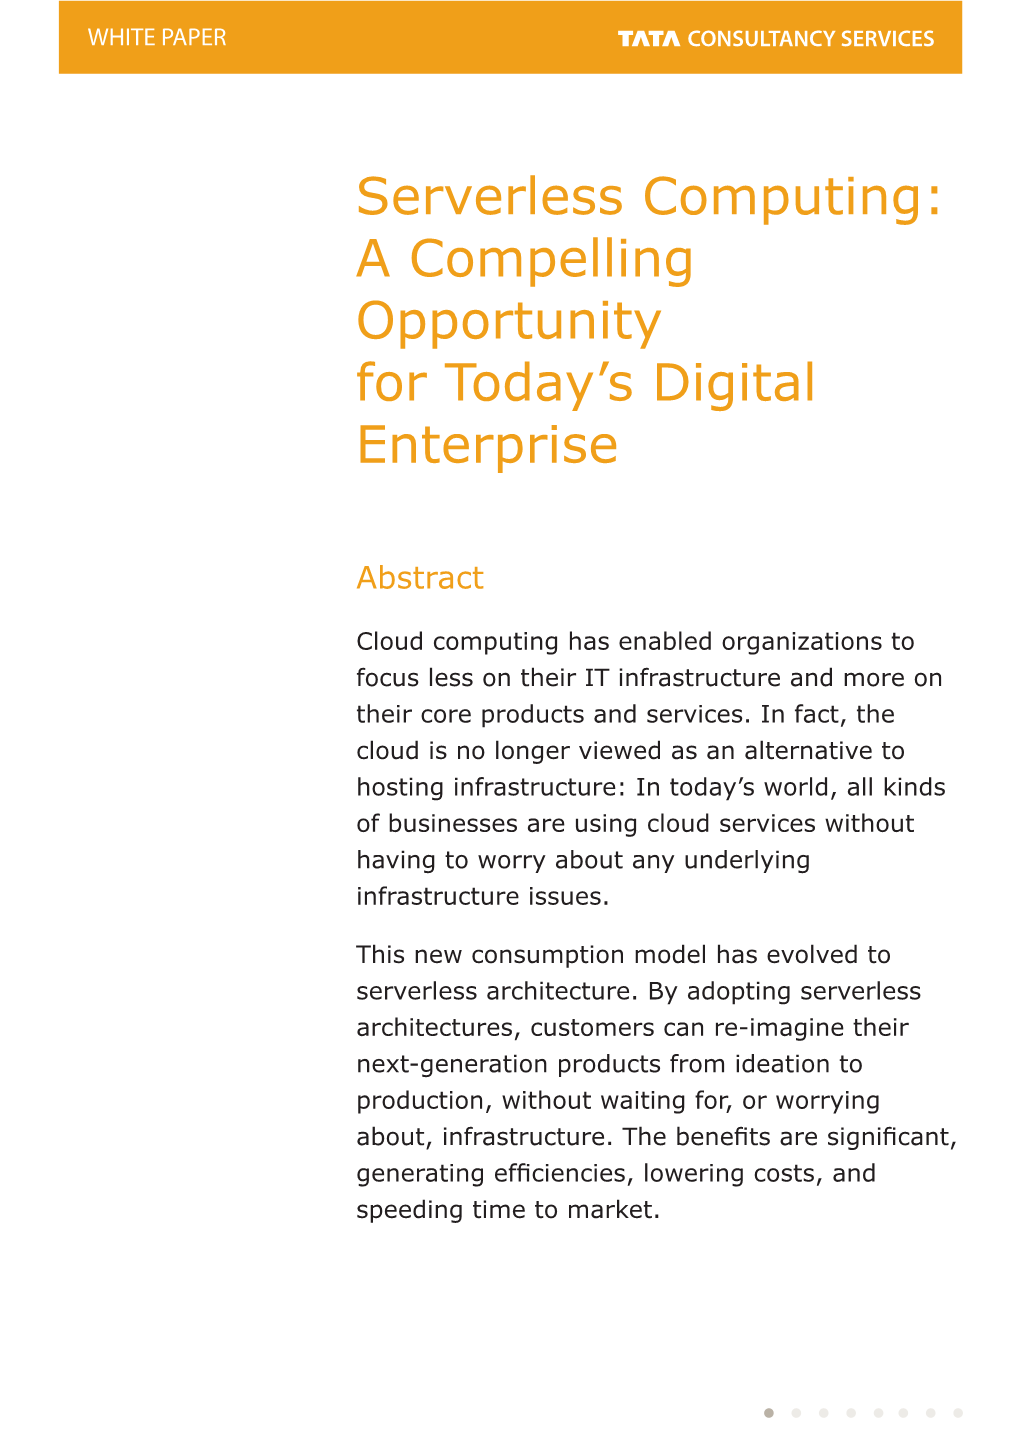 Serverless Computing: a Compelling Opportunity for Today's Digital Enterprise